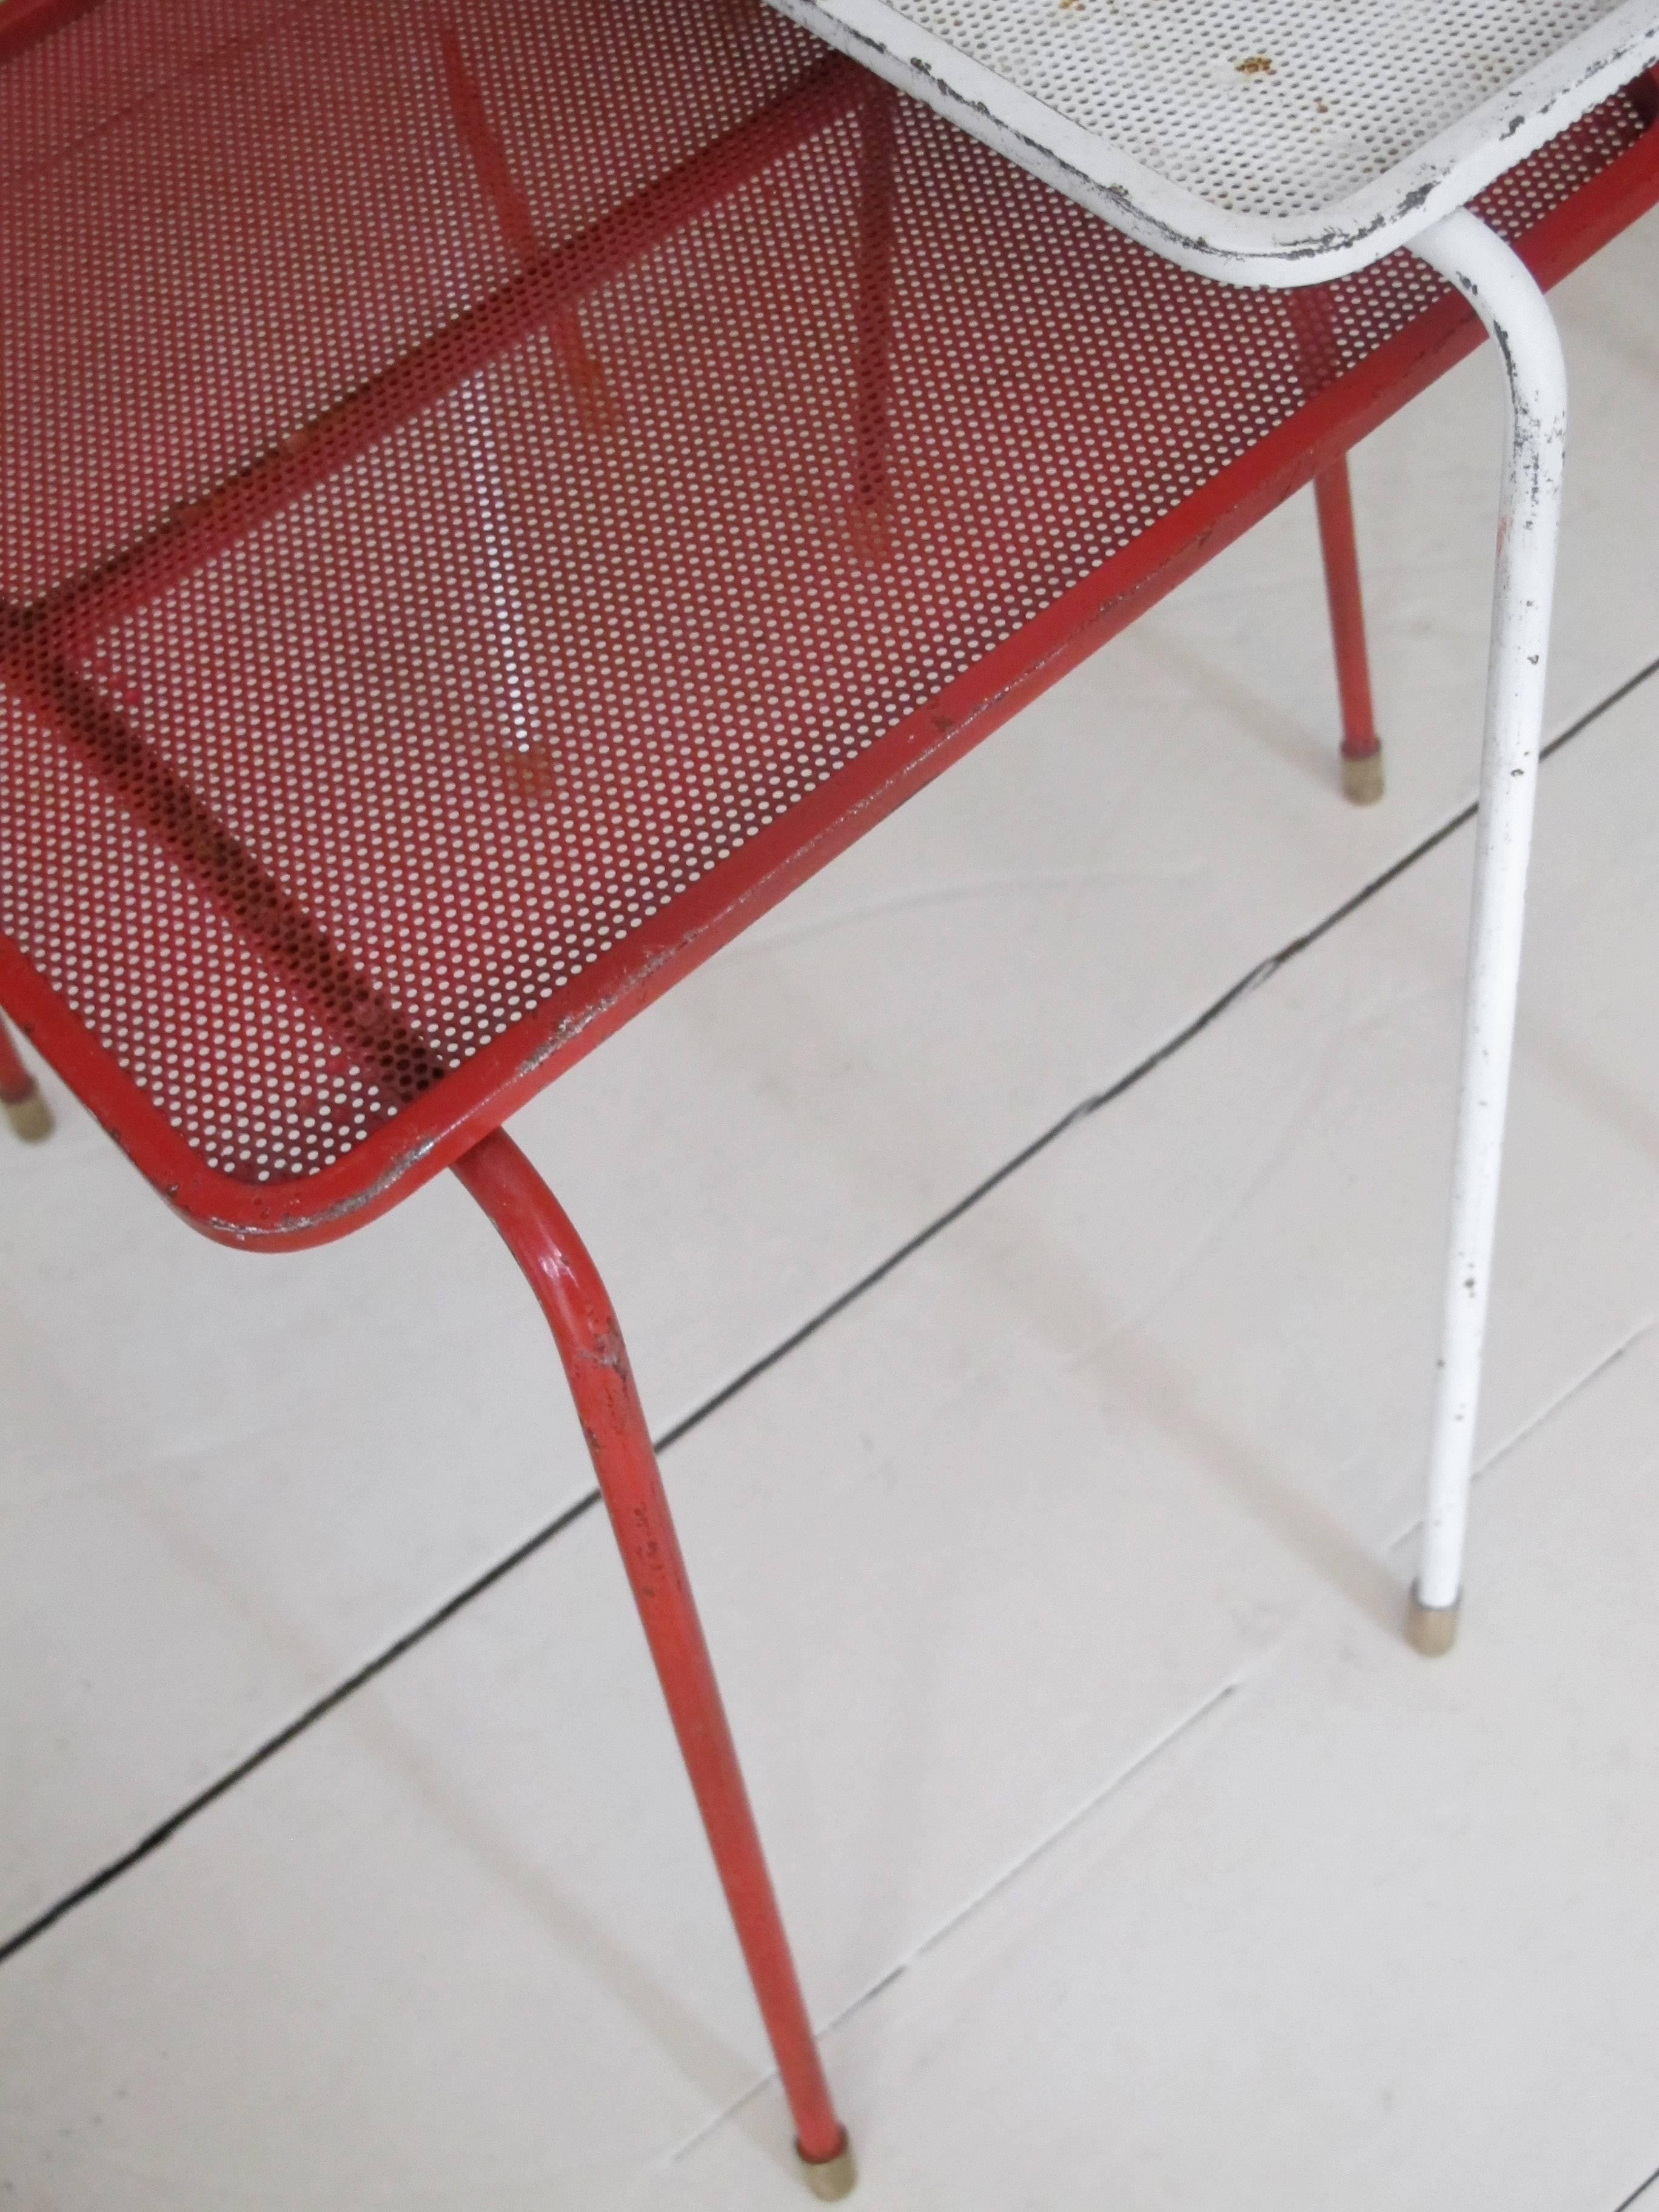 Pair of ‘Soumba’ nesting tables in red white and black perforated metal.
Painted tripod legs and brass feet,
Mathieu Matégot,
1953,
France.

Measures: 37 x 28 x 32 cm.
41 x 28 x 32 cm.
46 x 28 x 32 cm.